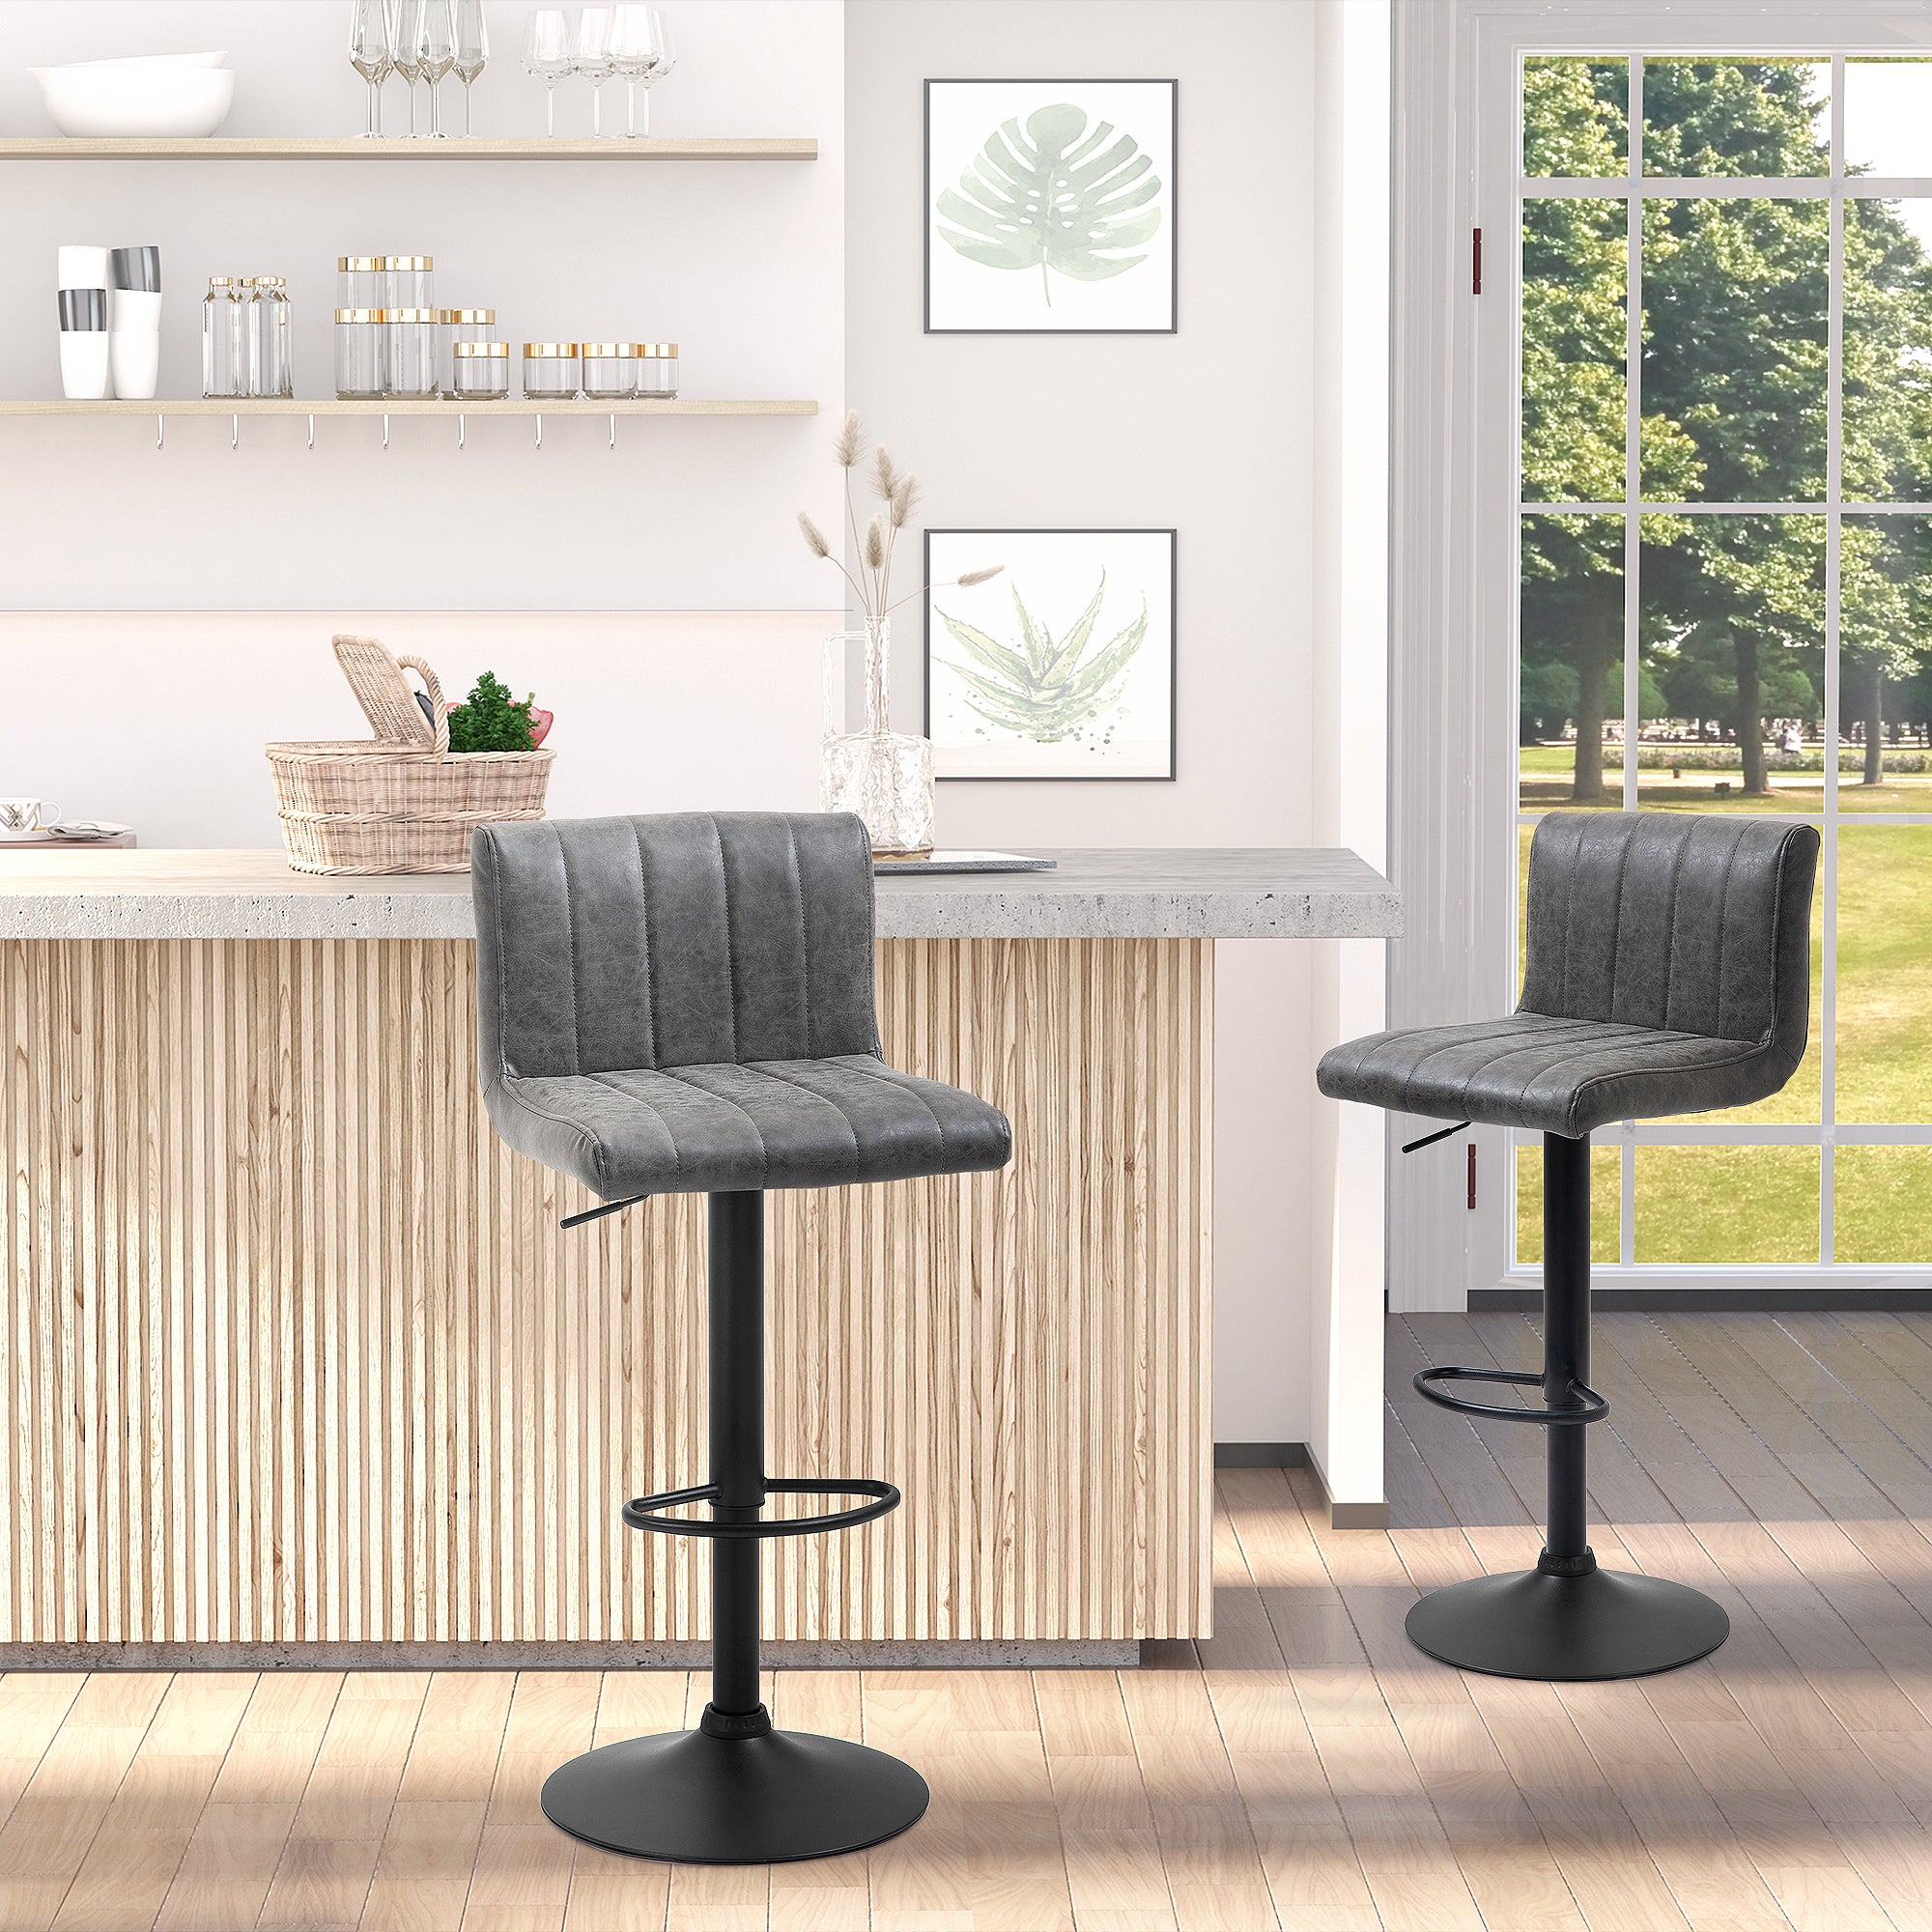 Set of 2 Adjustable Height Bar Chairs with Footrest, PU Leather, Gas Lift, Grey  AOSOM   